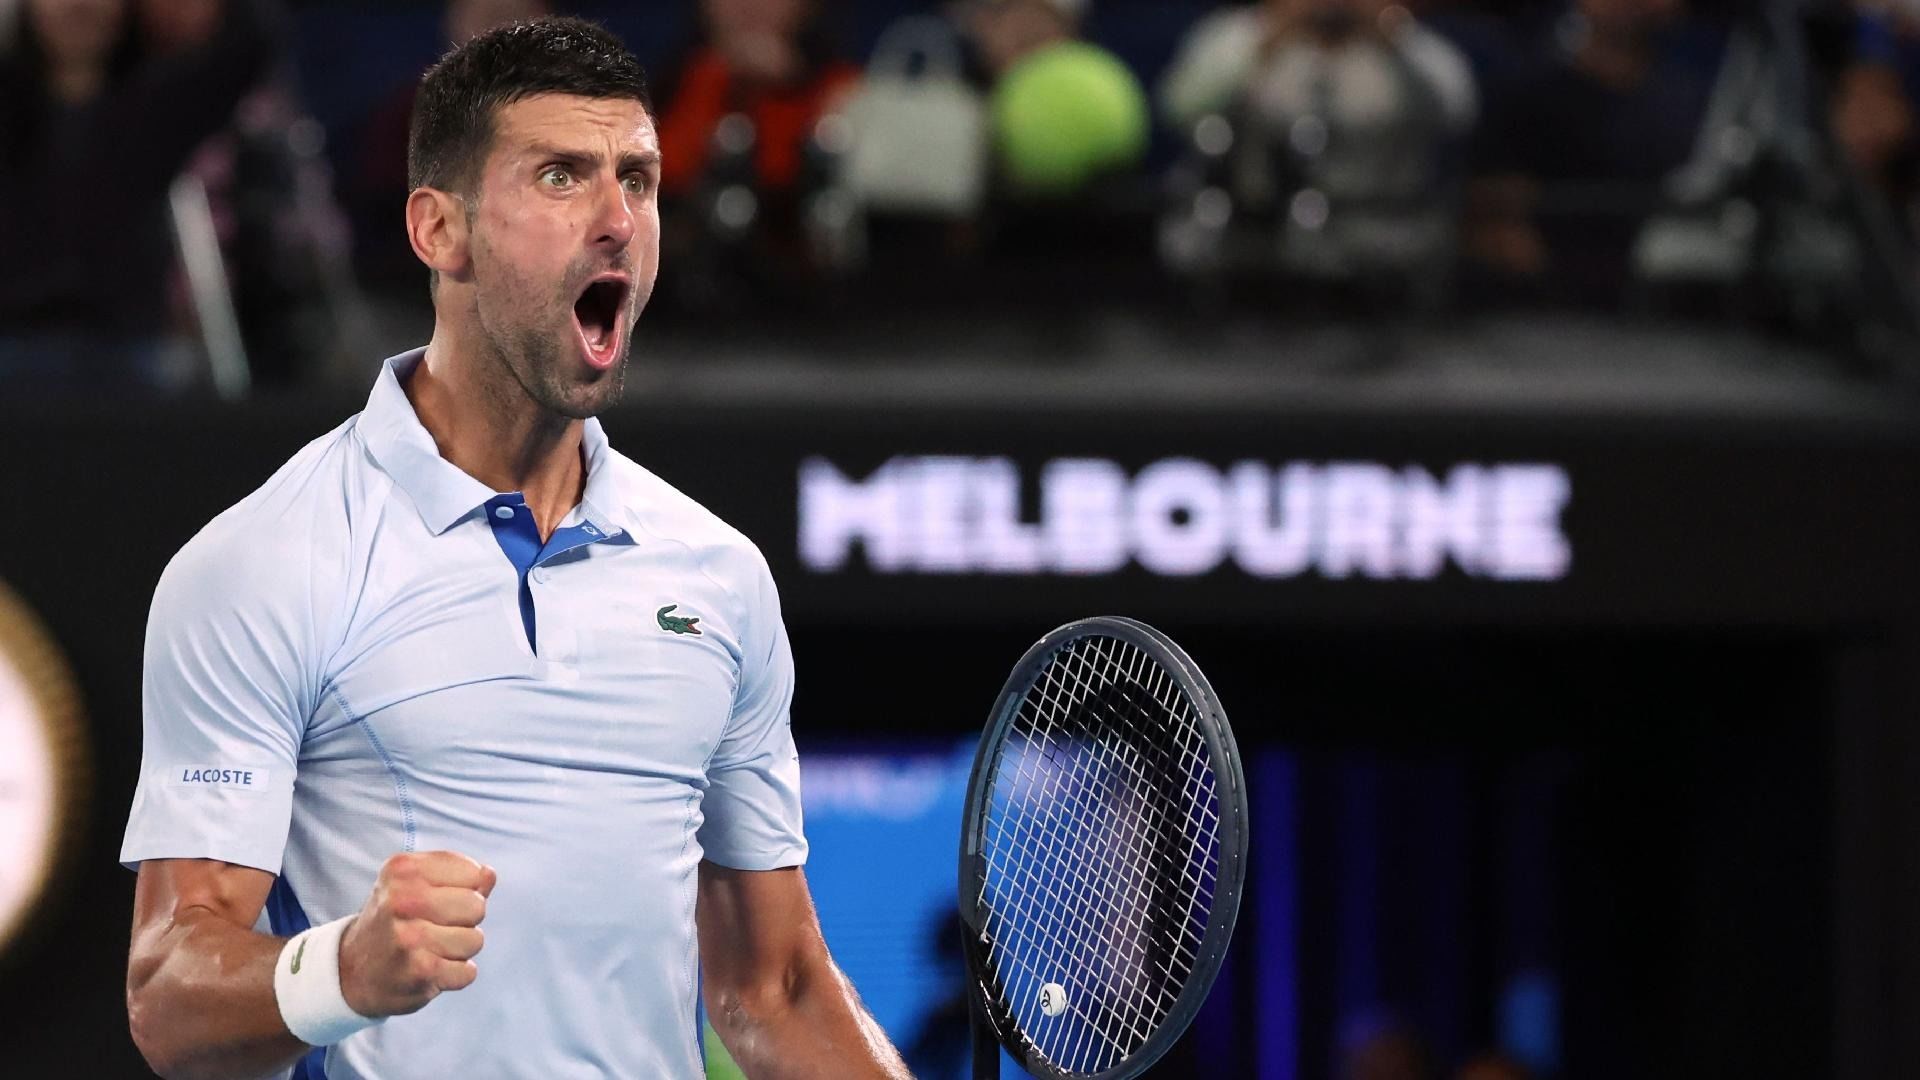 Djokovic Has His 700th Hard Court Win, Chasing Federer's Record